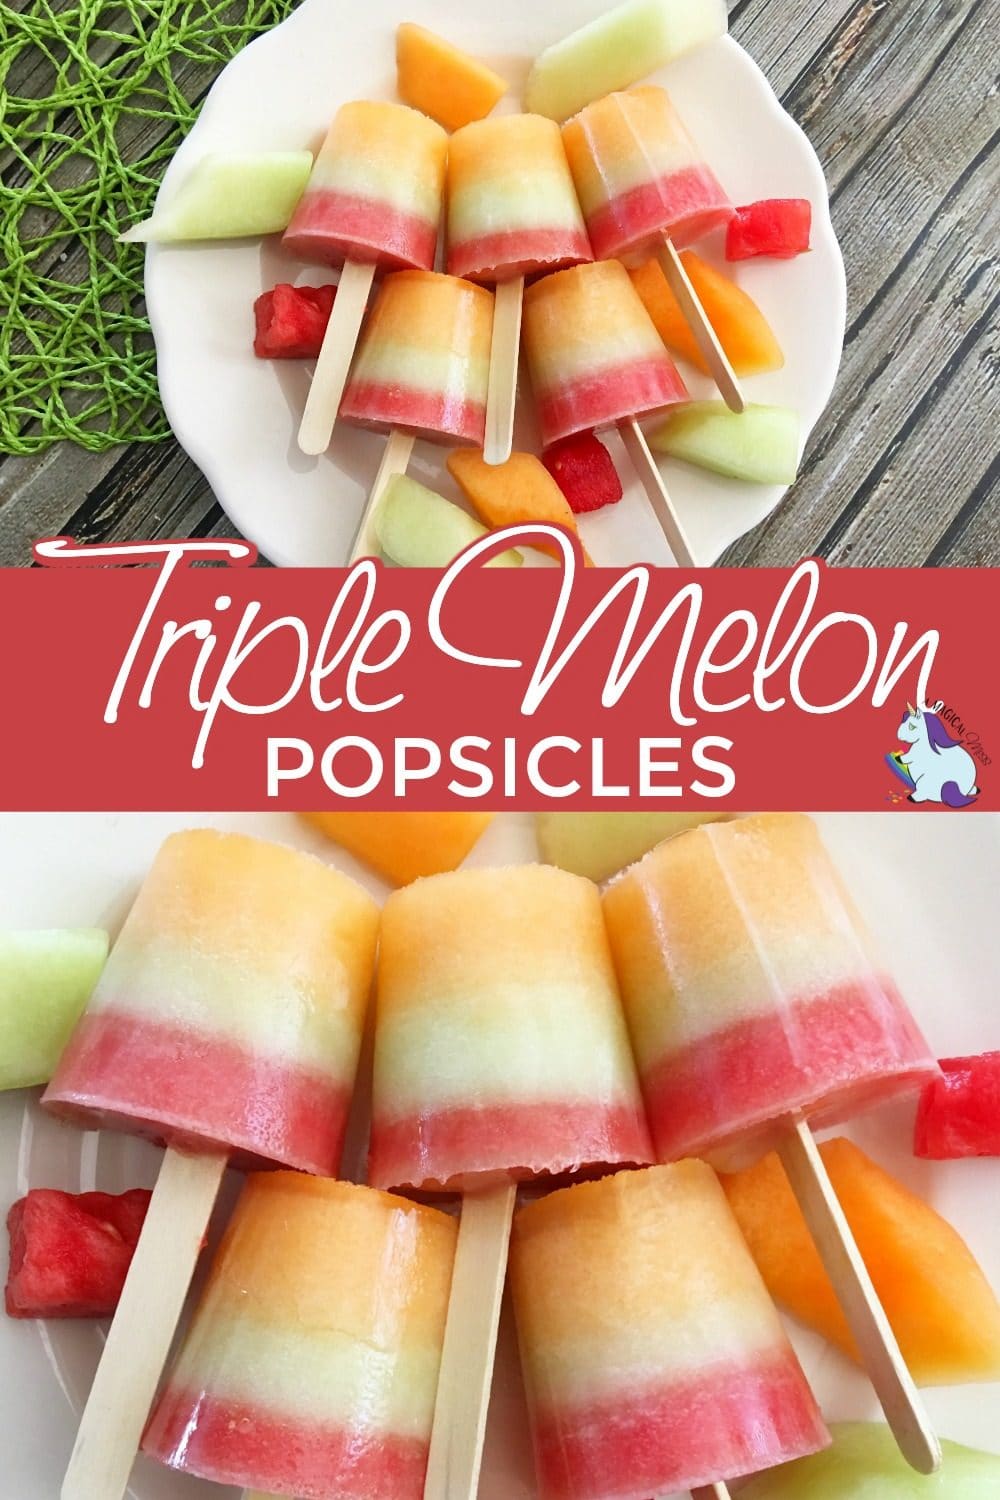 Cantaloupe, honeydew, and watermelon popsicles recipe layered.